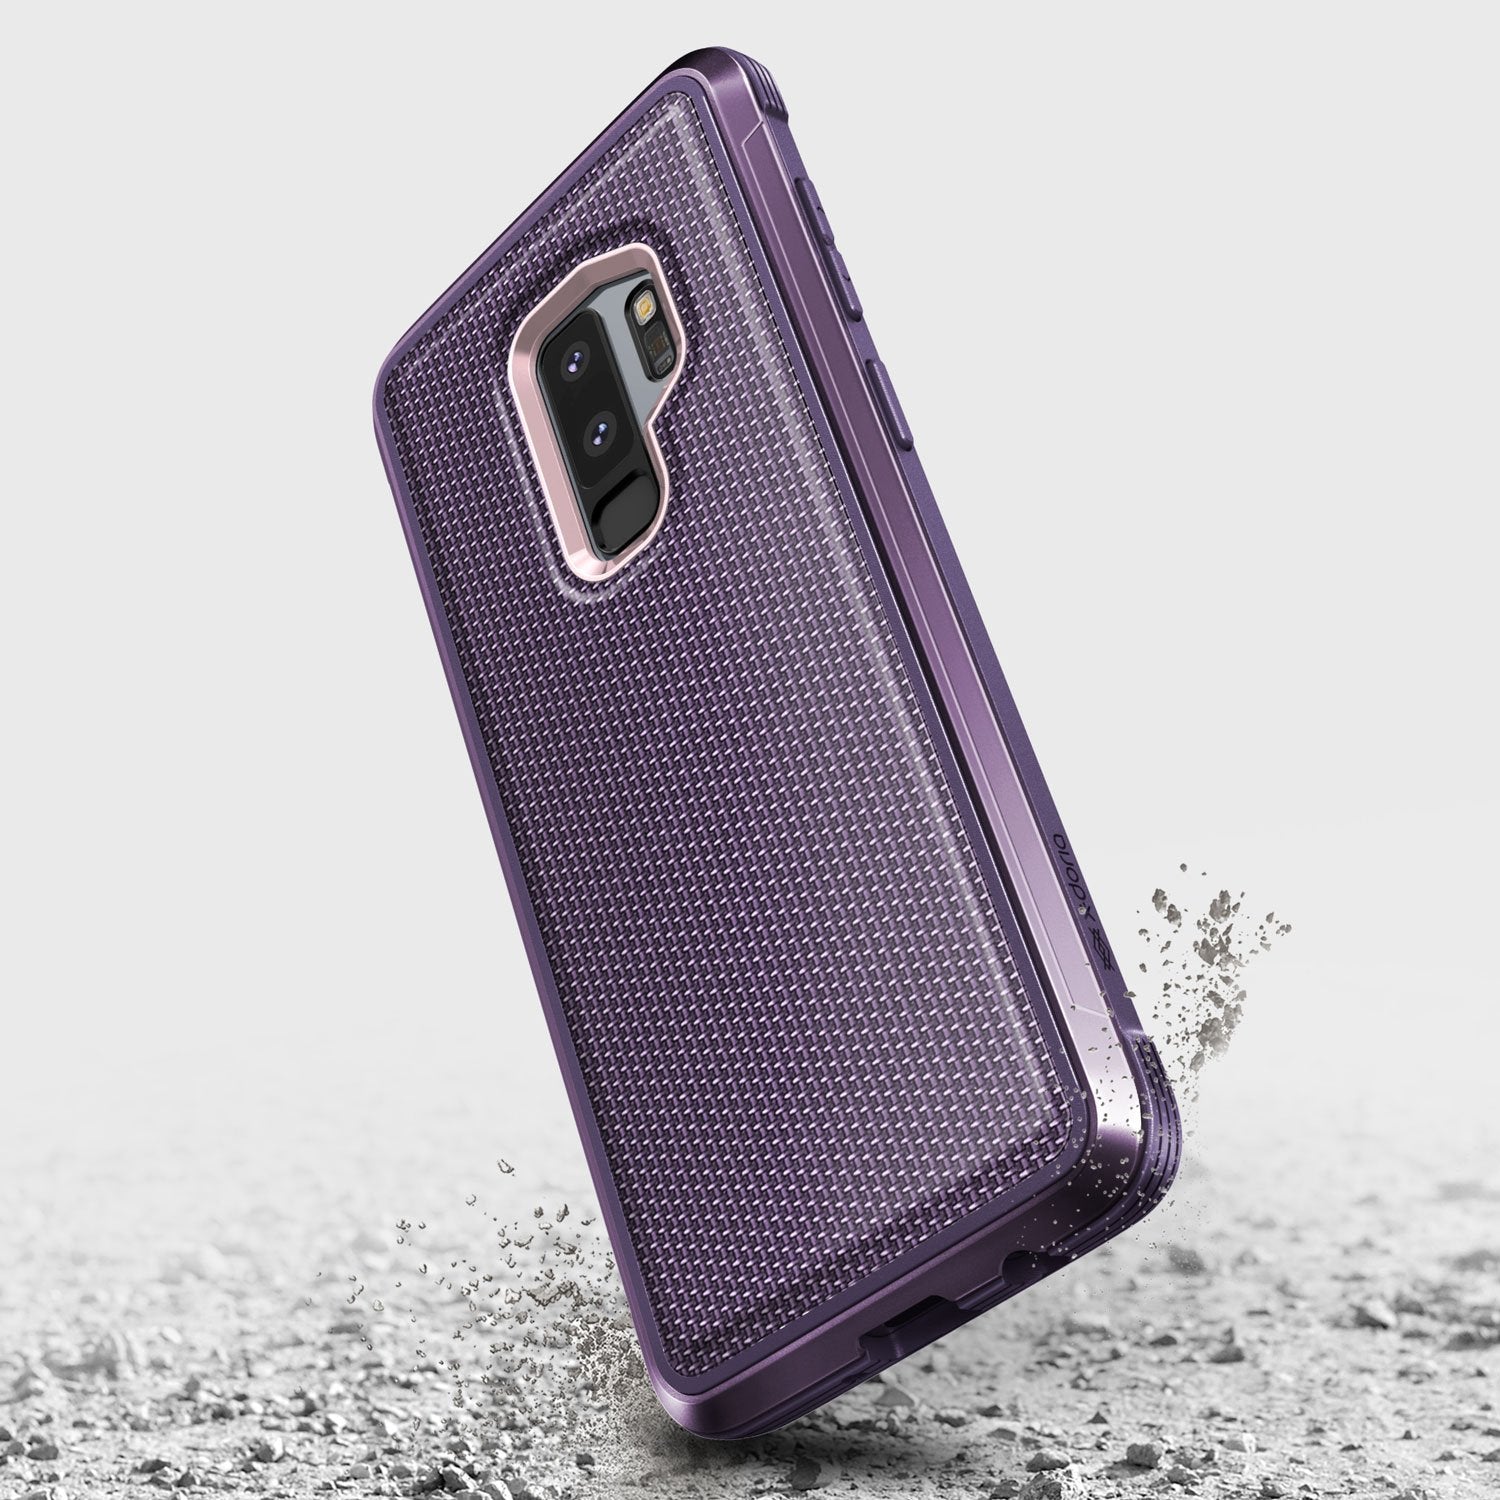 Luxurious Case for Samsung Galaxy S9 Plus. Raptic Lux in purple.